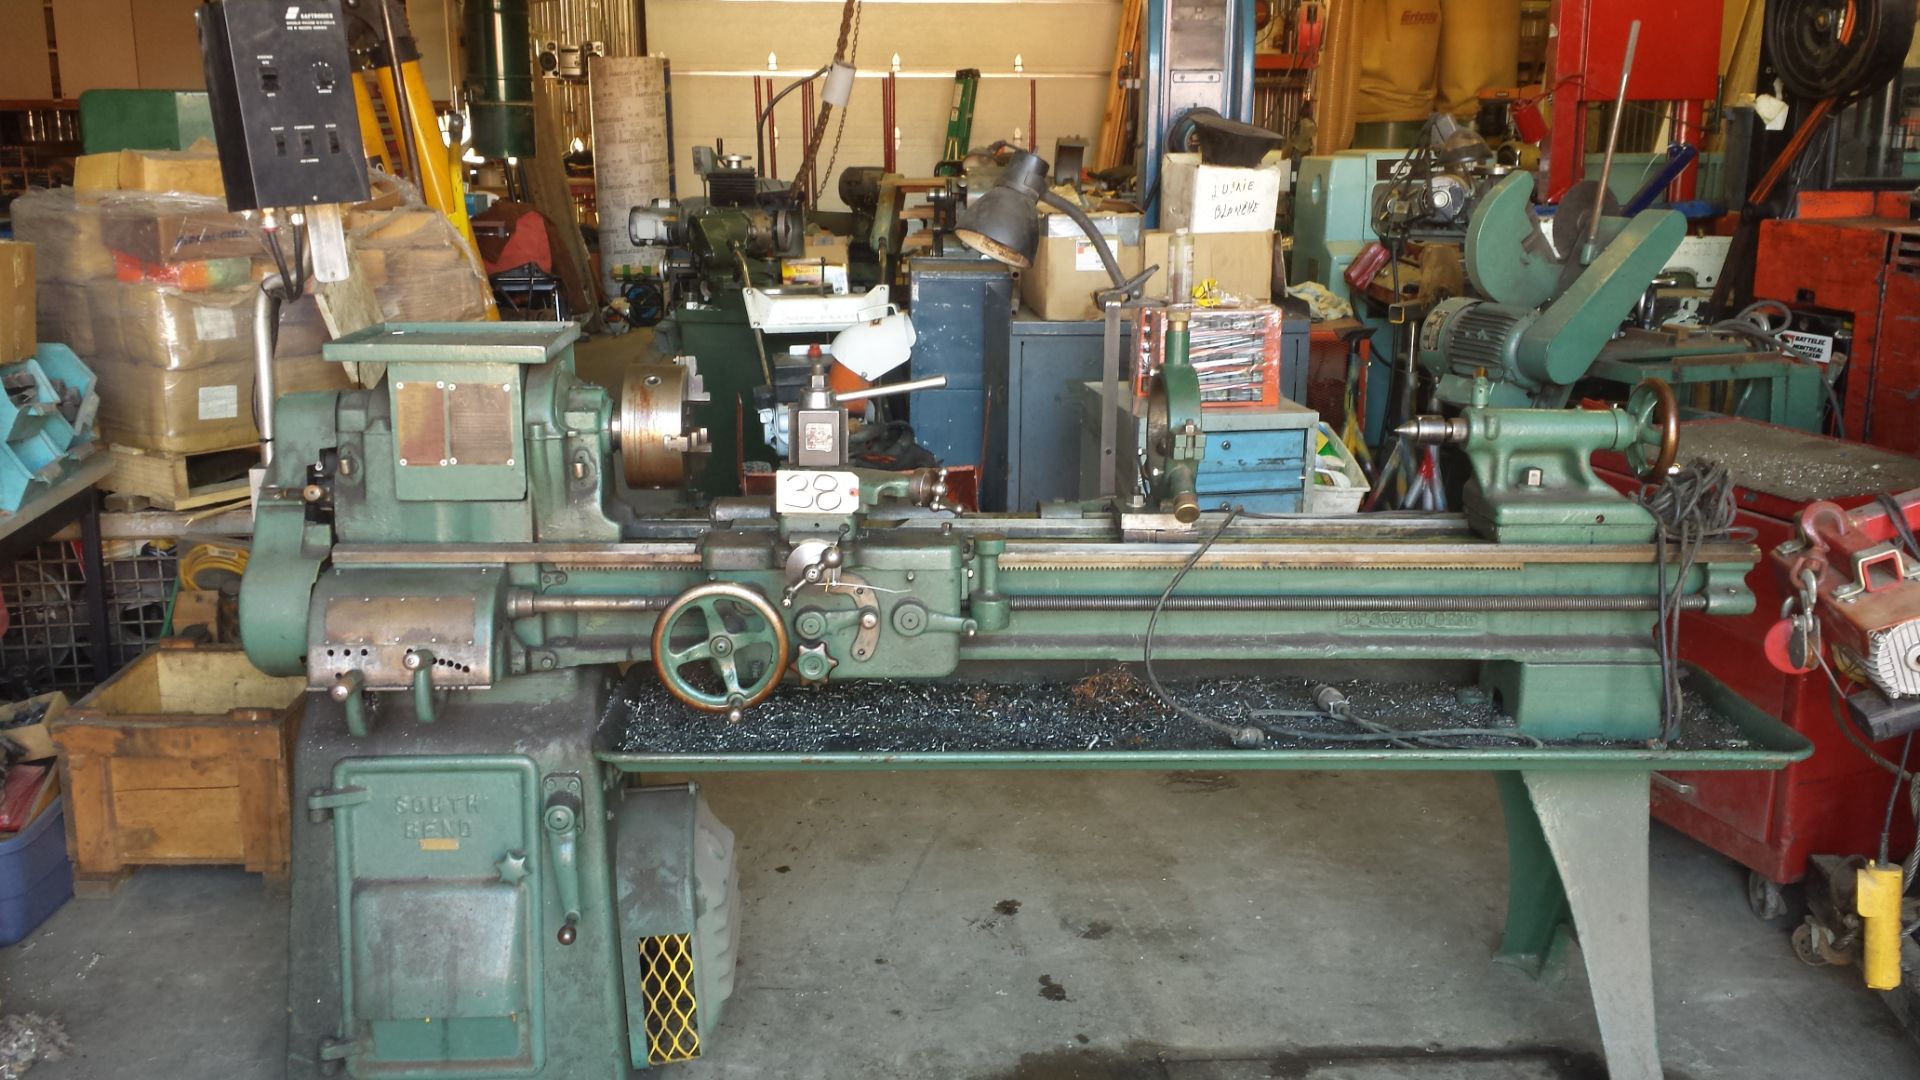 Lathe 13-60  with Variable Speed comes with 3 chucks and tooling